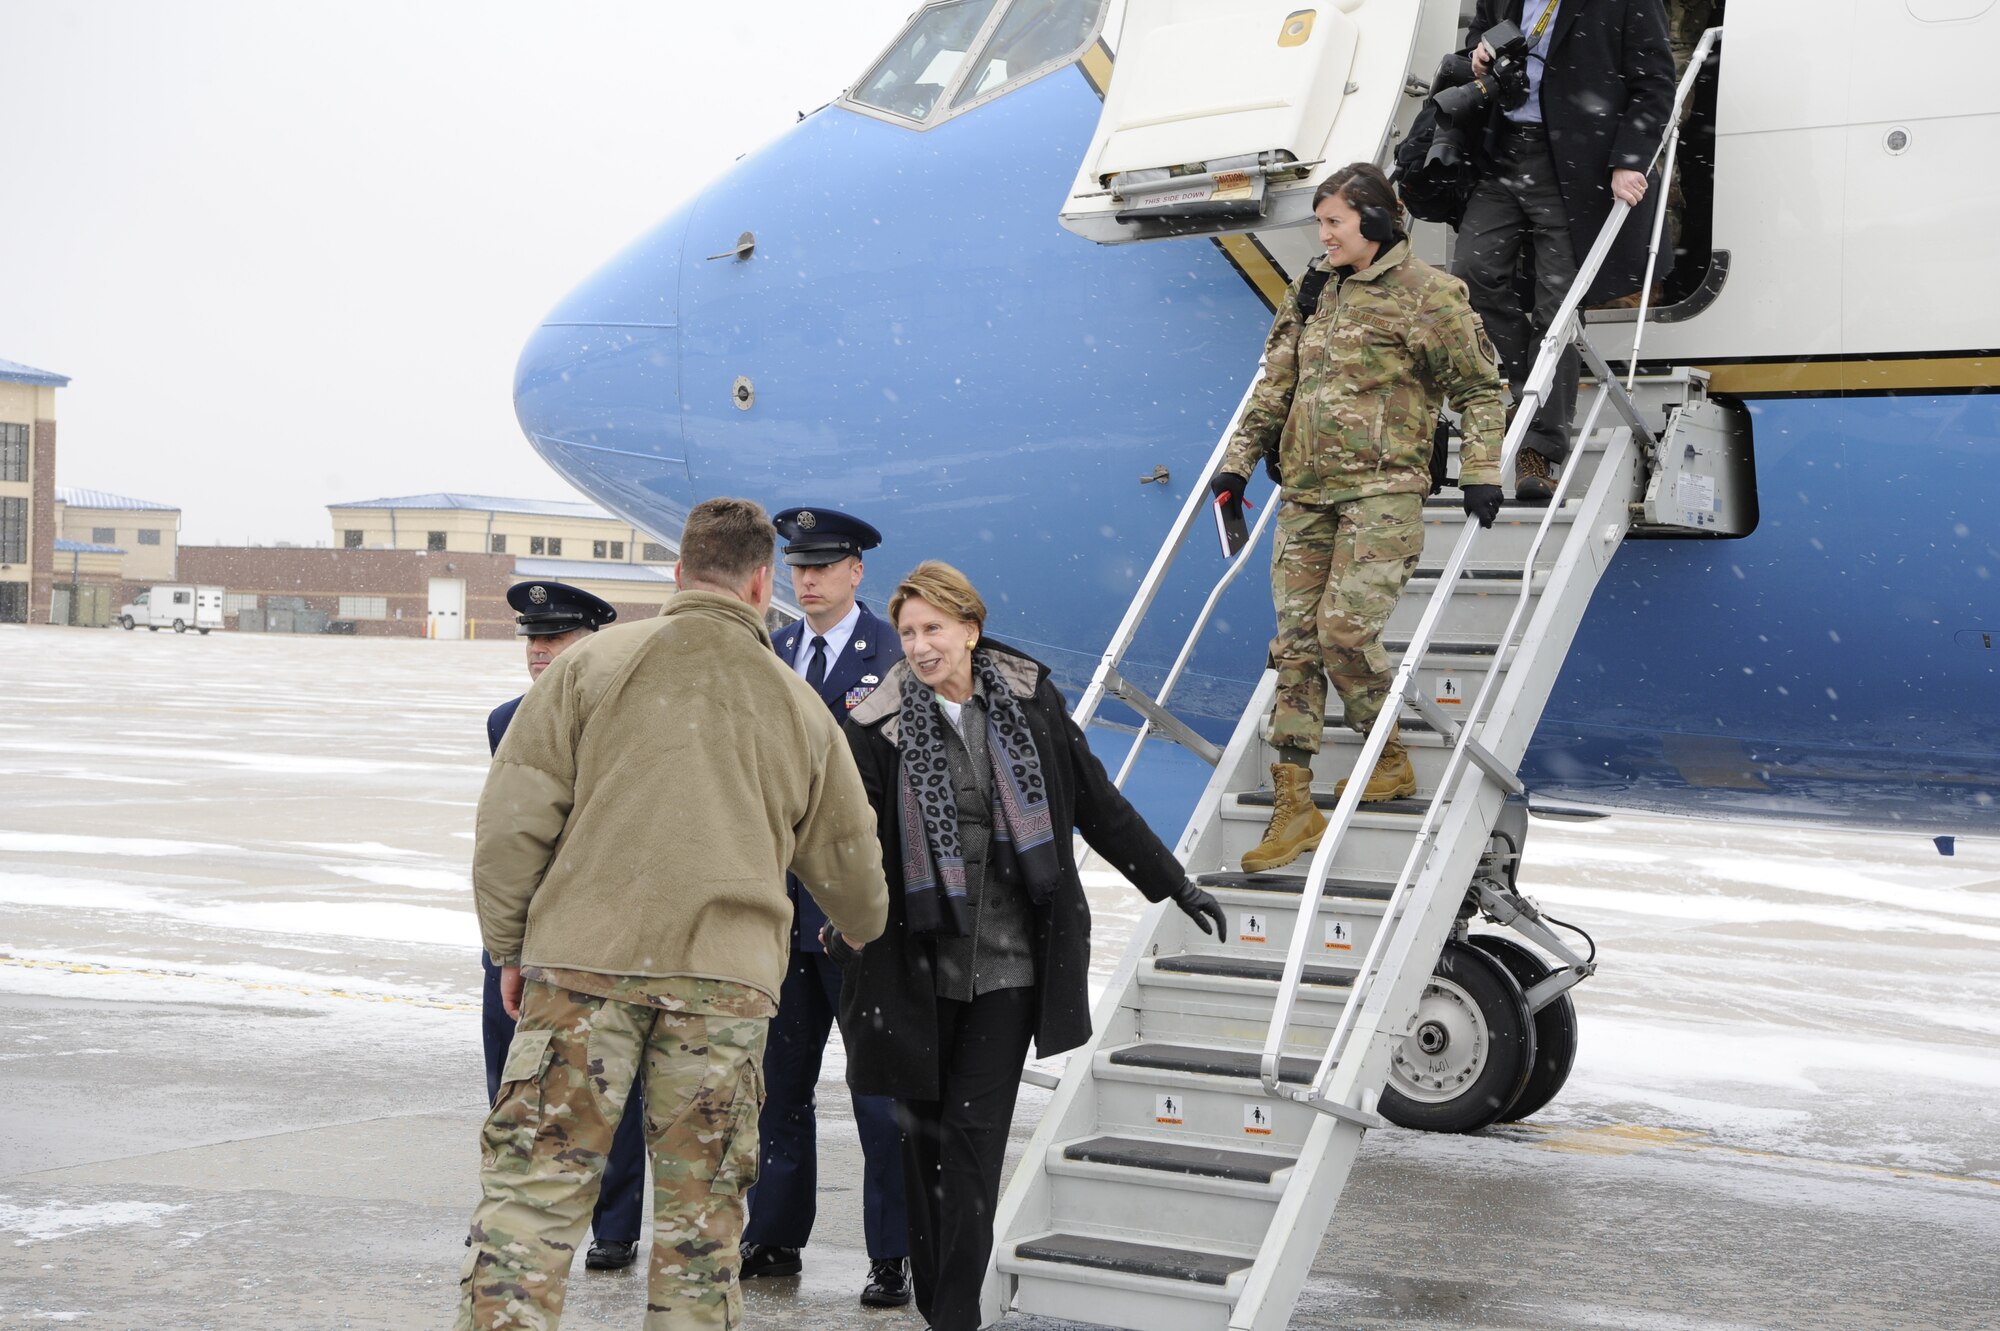 U.S. Air Force Col. Peter Bonetti, 90th Missile Wing Commander, welcomes Secretary of the Air Force Barbara Barrett at the 153d Airlift Wing, Wyoming Air National Guard Base, Cheyenne, Wyo., Oct. 27, 2019. This visit marks Barrett's first official visit since becoming the SECAF.